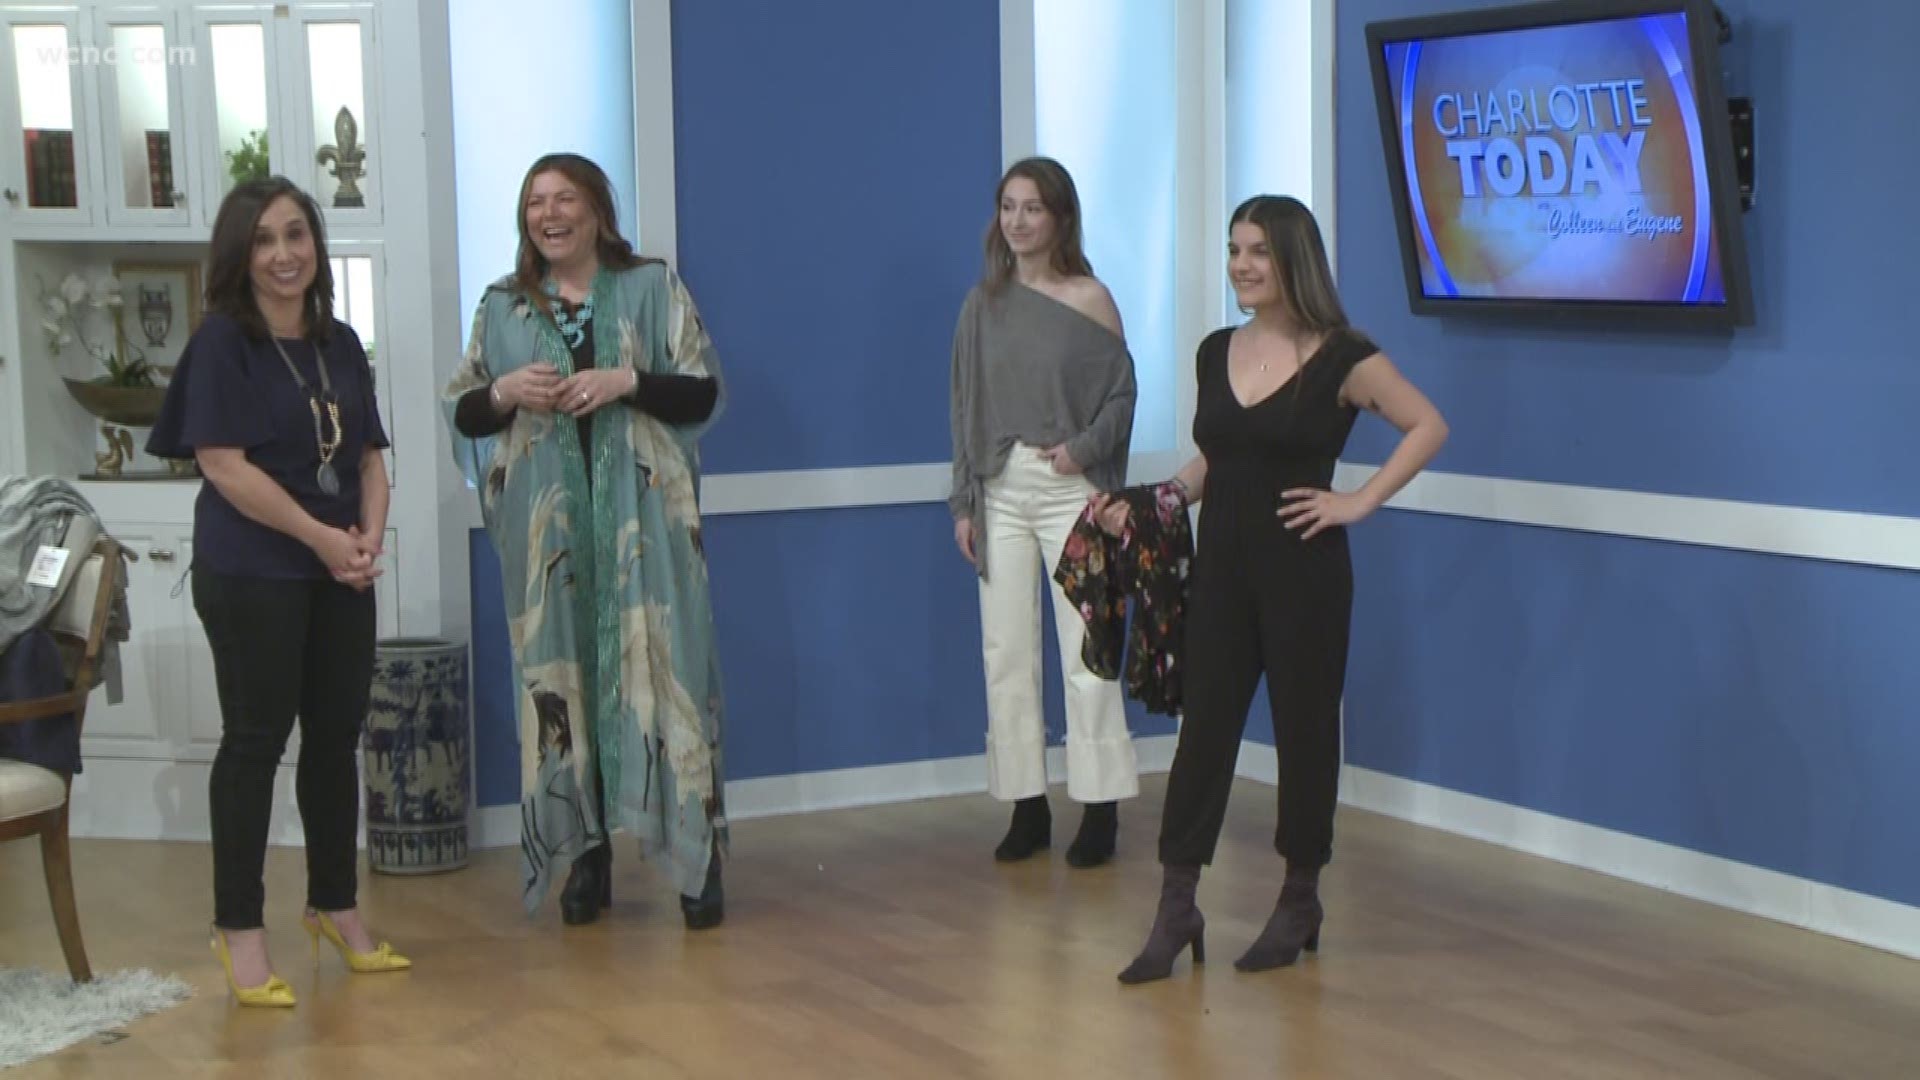 Stylist Tracy Sanchez from Summer Bird Boutique shows how we can layer up to dress for the cold mornings and warm afternoons but still look fashionable.